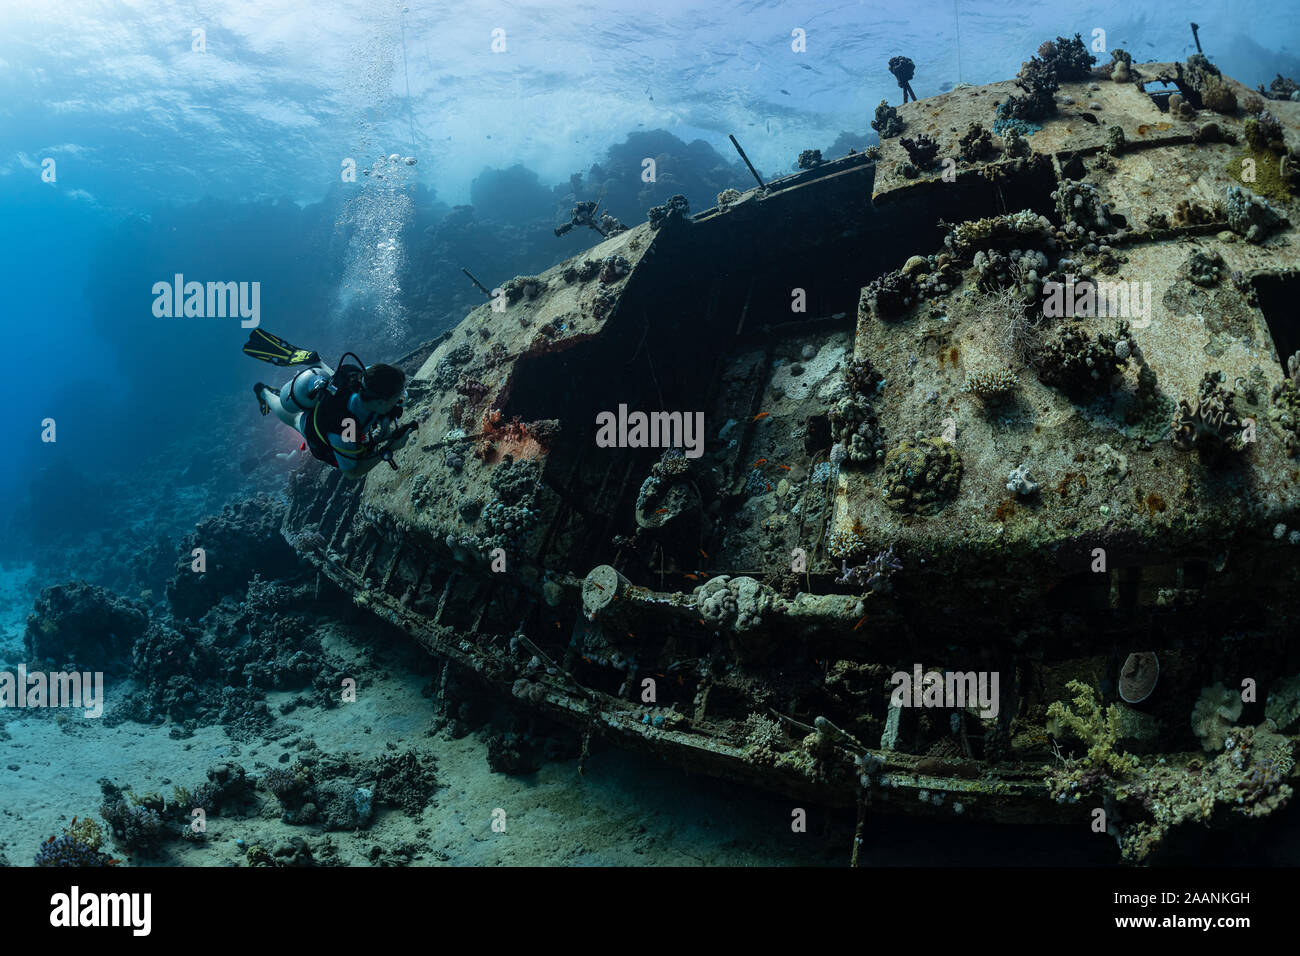 woman diver visiting an underwater wreck of a metal sailboat on a reef in the Rea Sea, Egypt Stock Photo